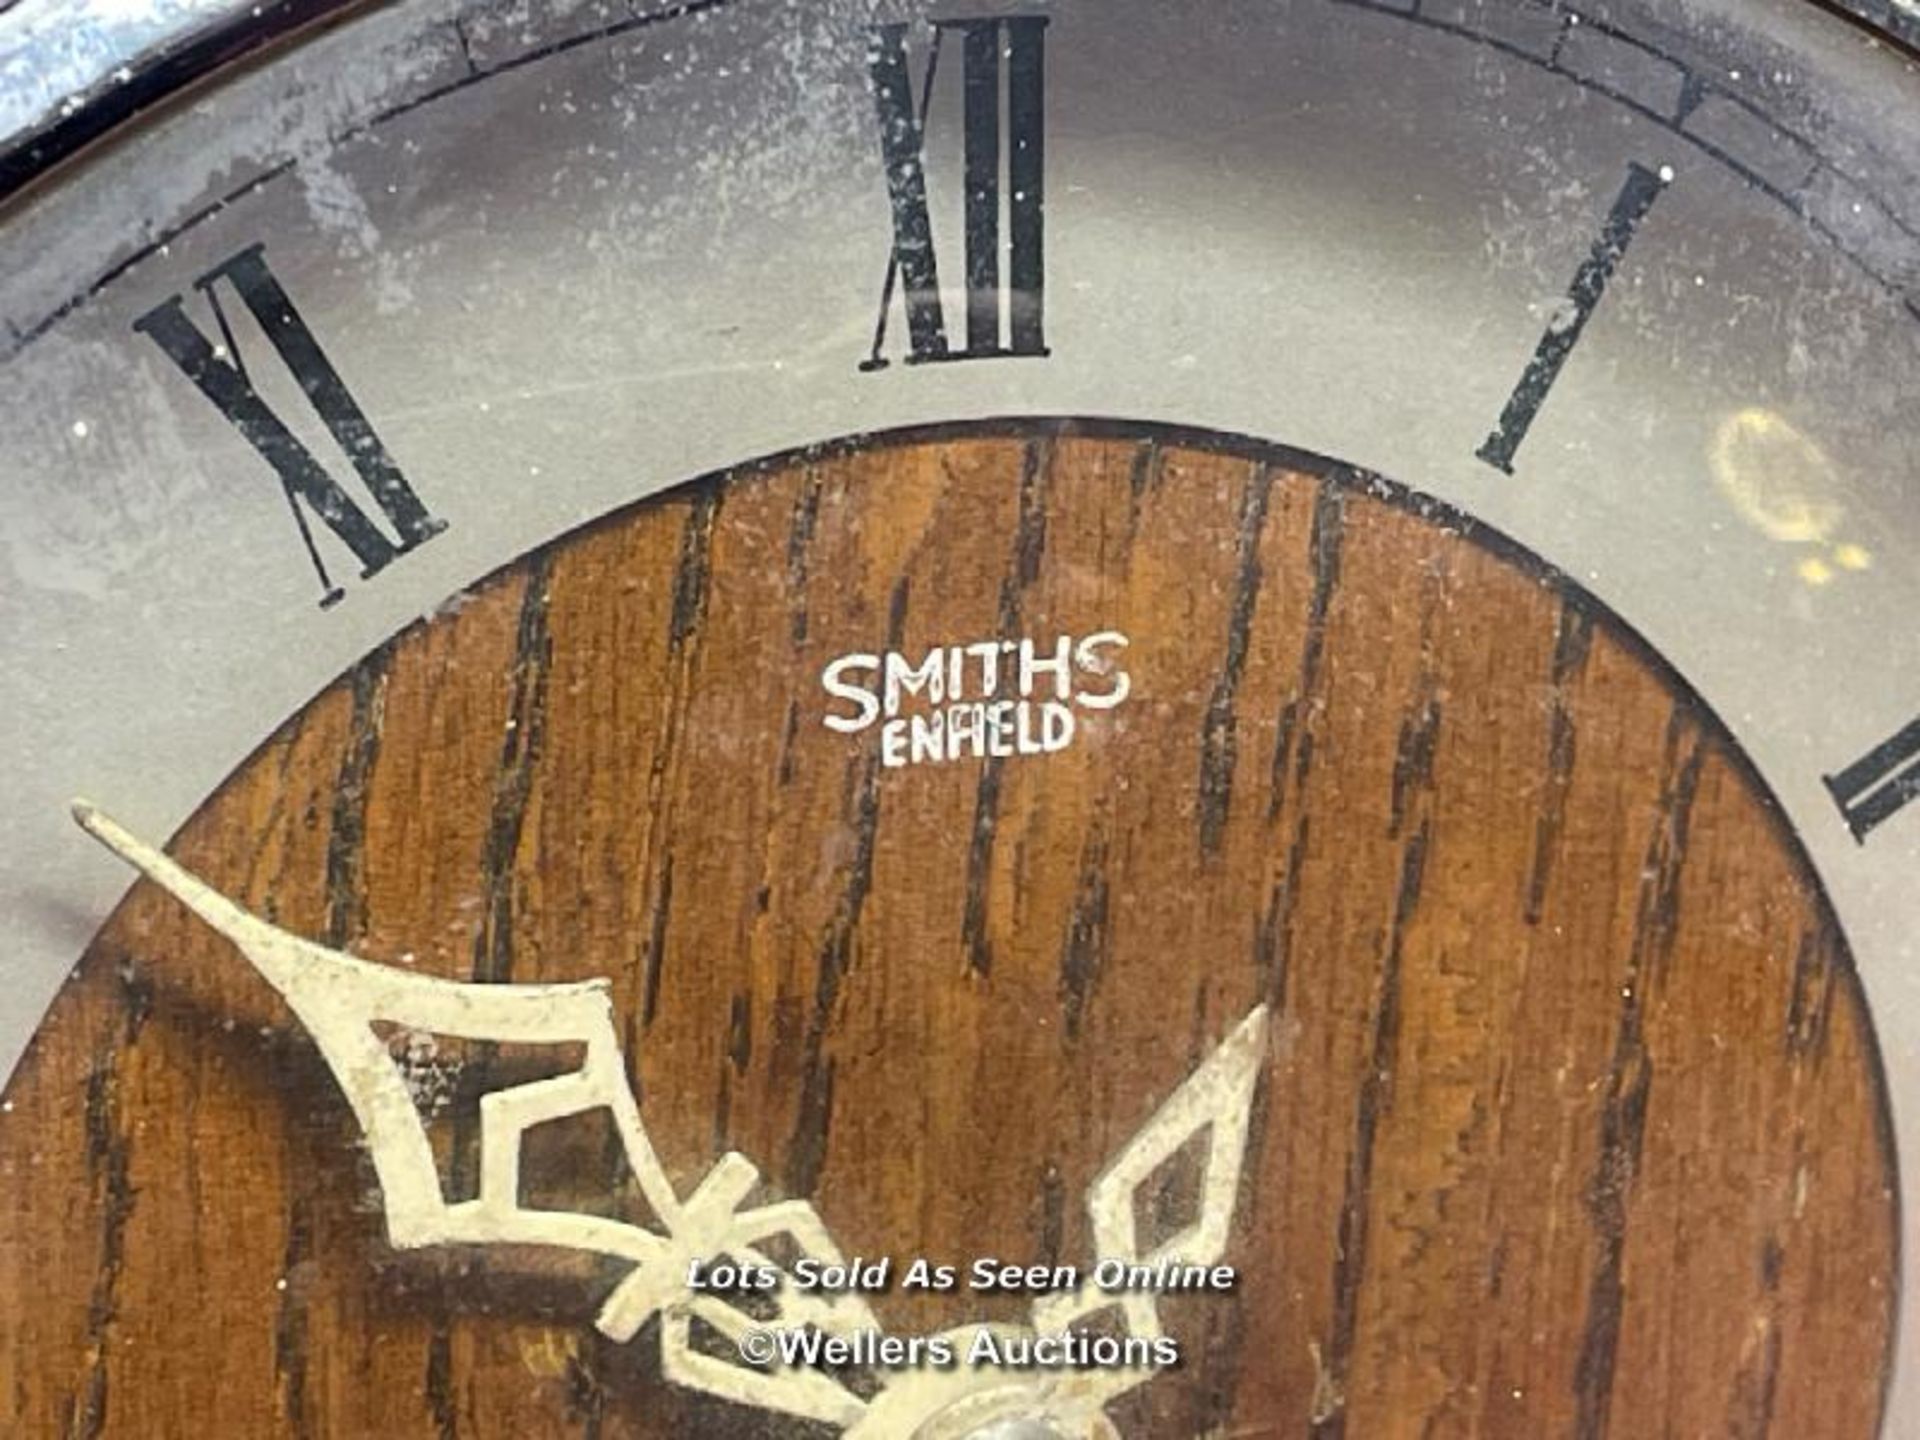 SMITHS FENFIELD PRESENTATION CLOCK, INSCRIBED PRESENTED TO MISS P BUCKLEY BY THE STAFF AND EMPLOYEES - Image 3 of 7